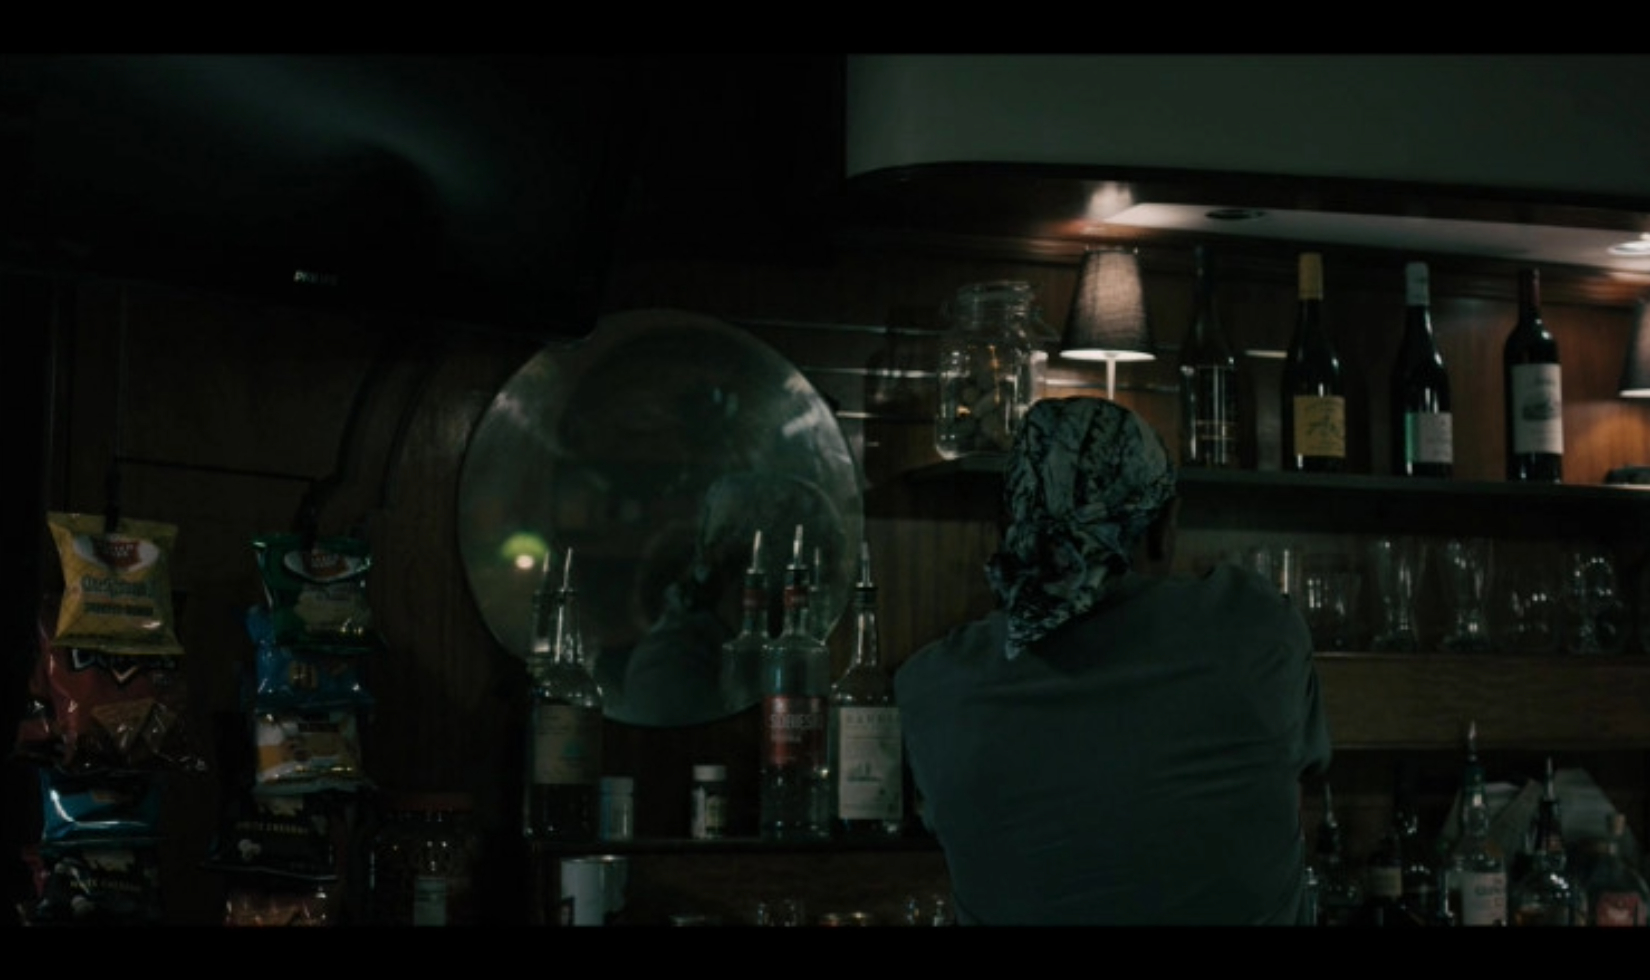 Screenshot from TV series Justified: City of Primevil, showing Jordan Cabernet Sauvignon on the shelf behind a bar in a scene